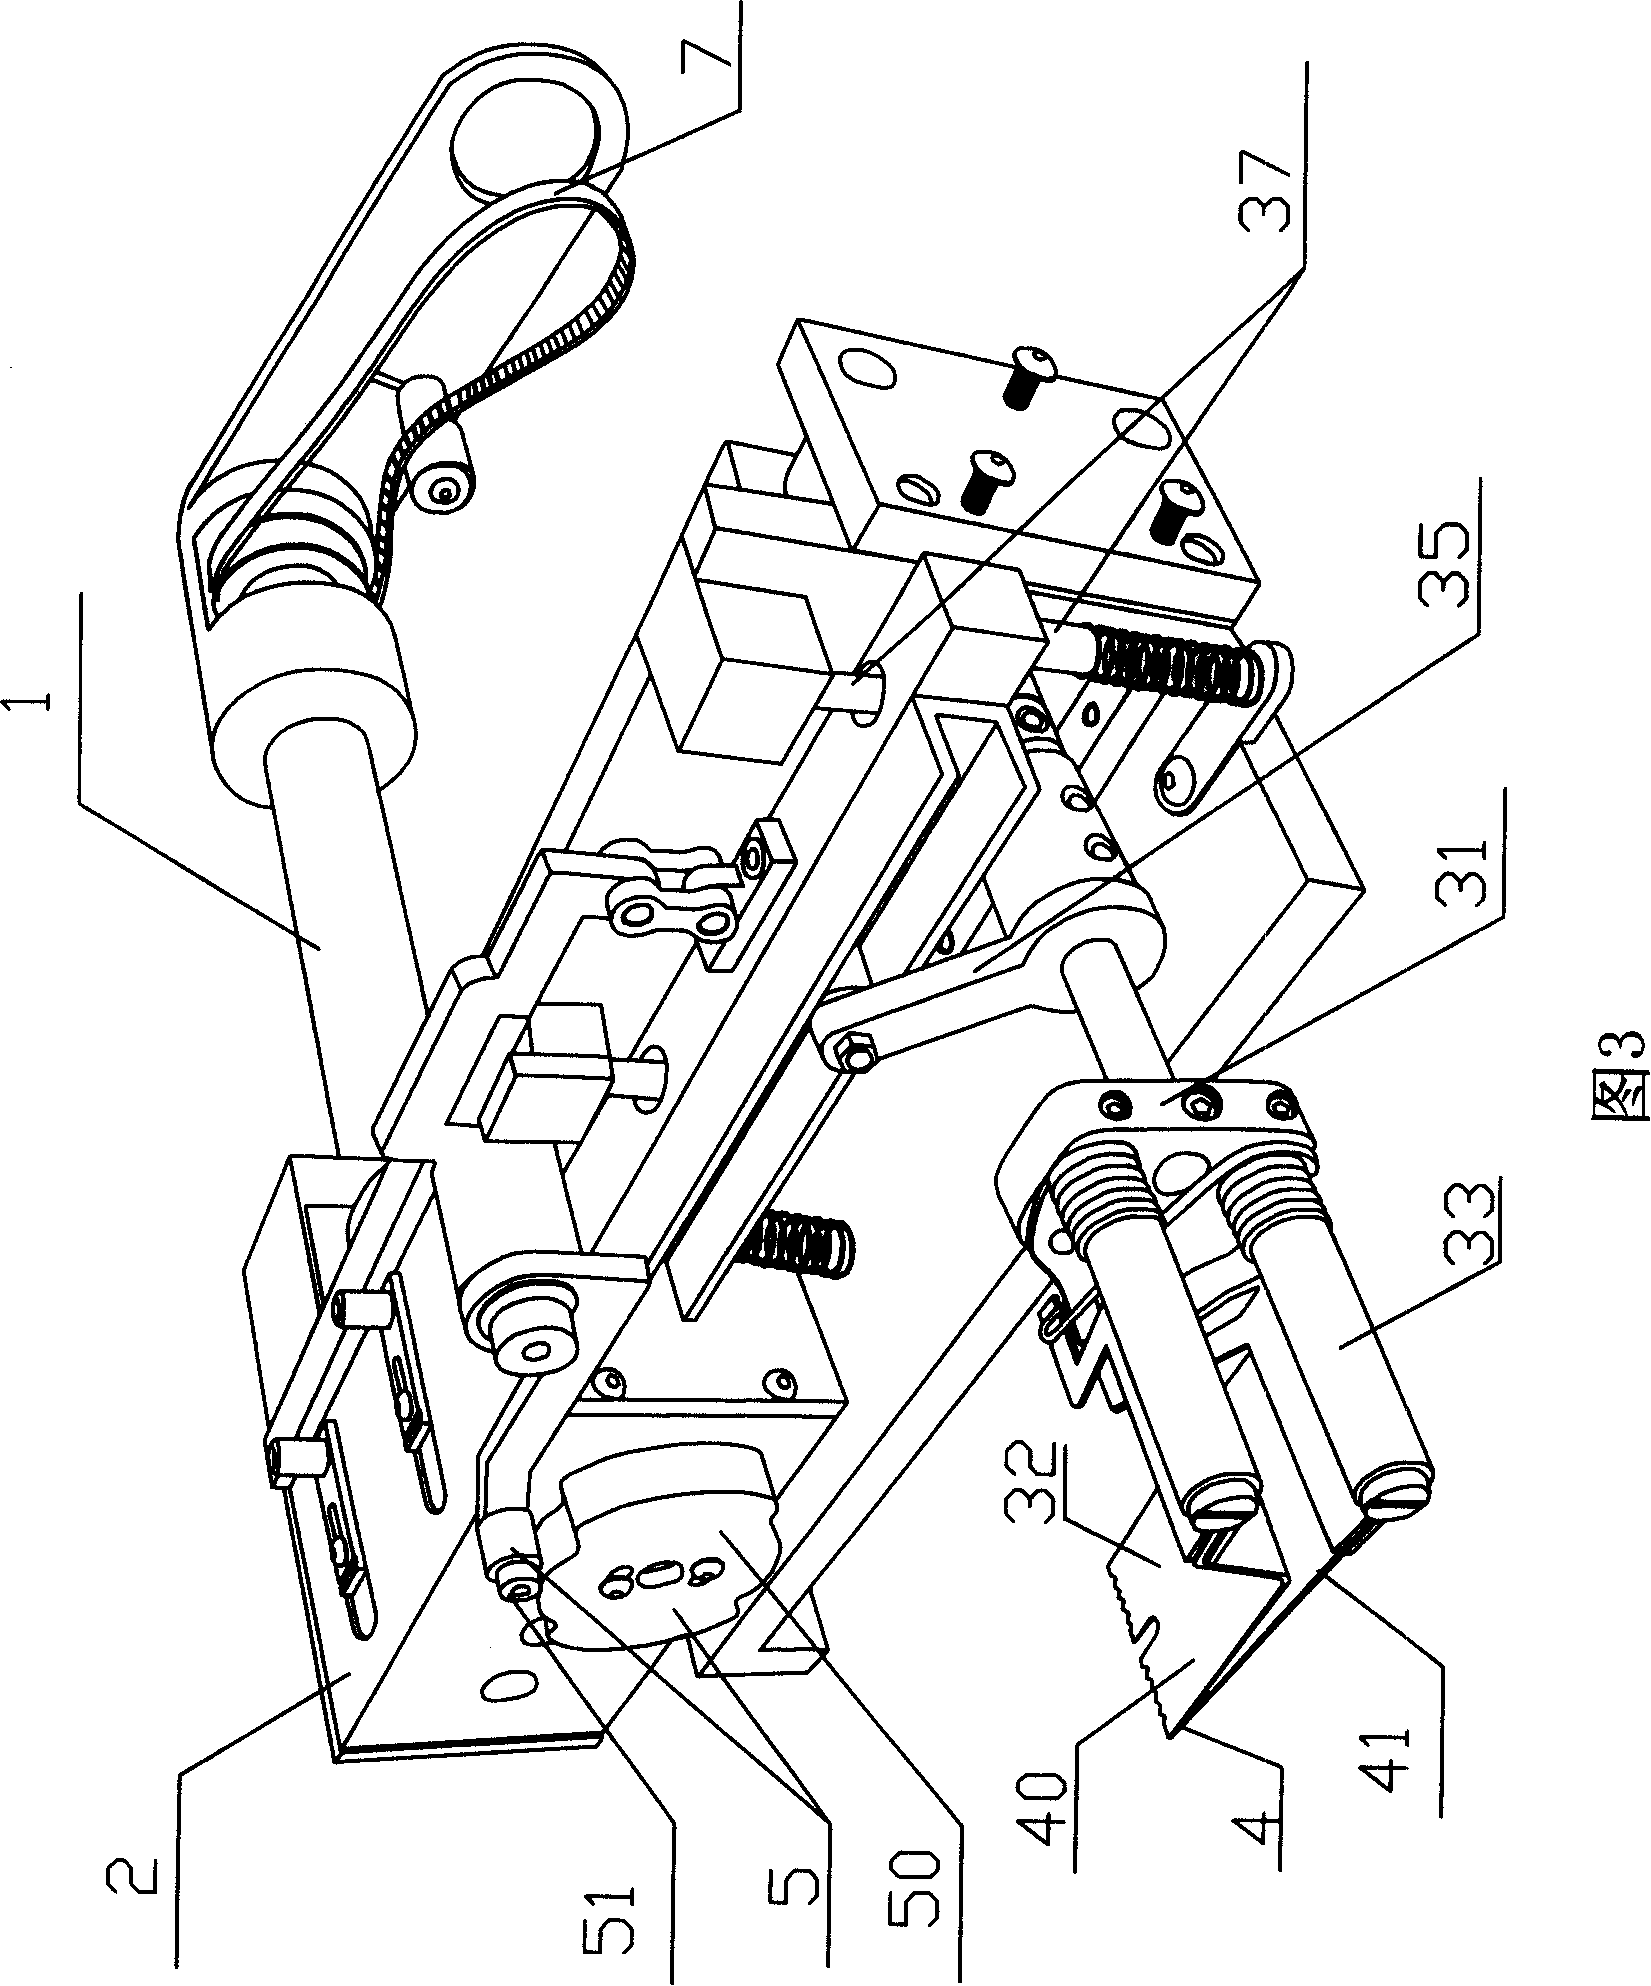 Pleating device